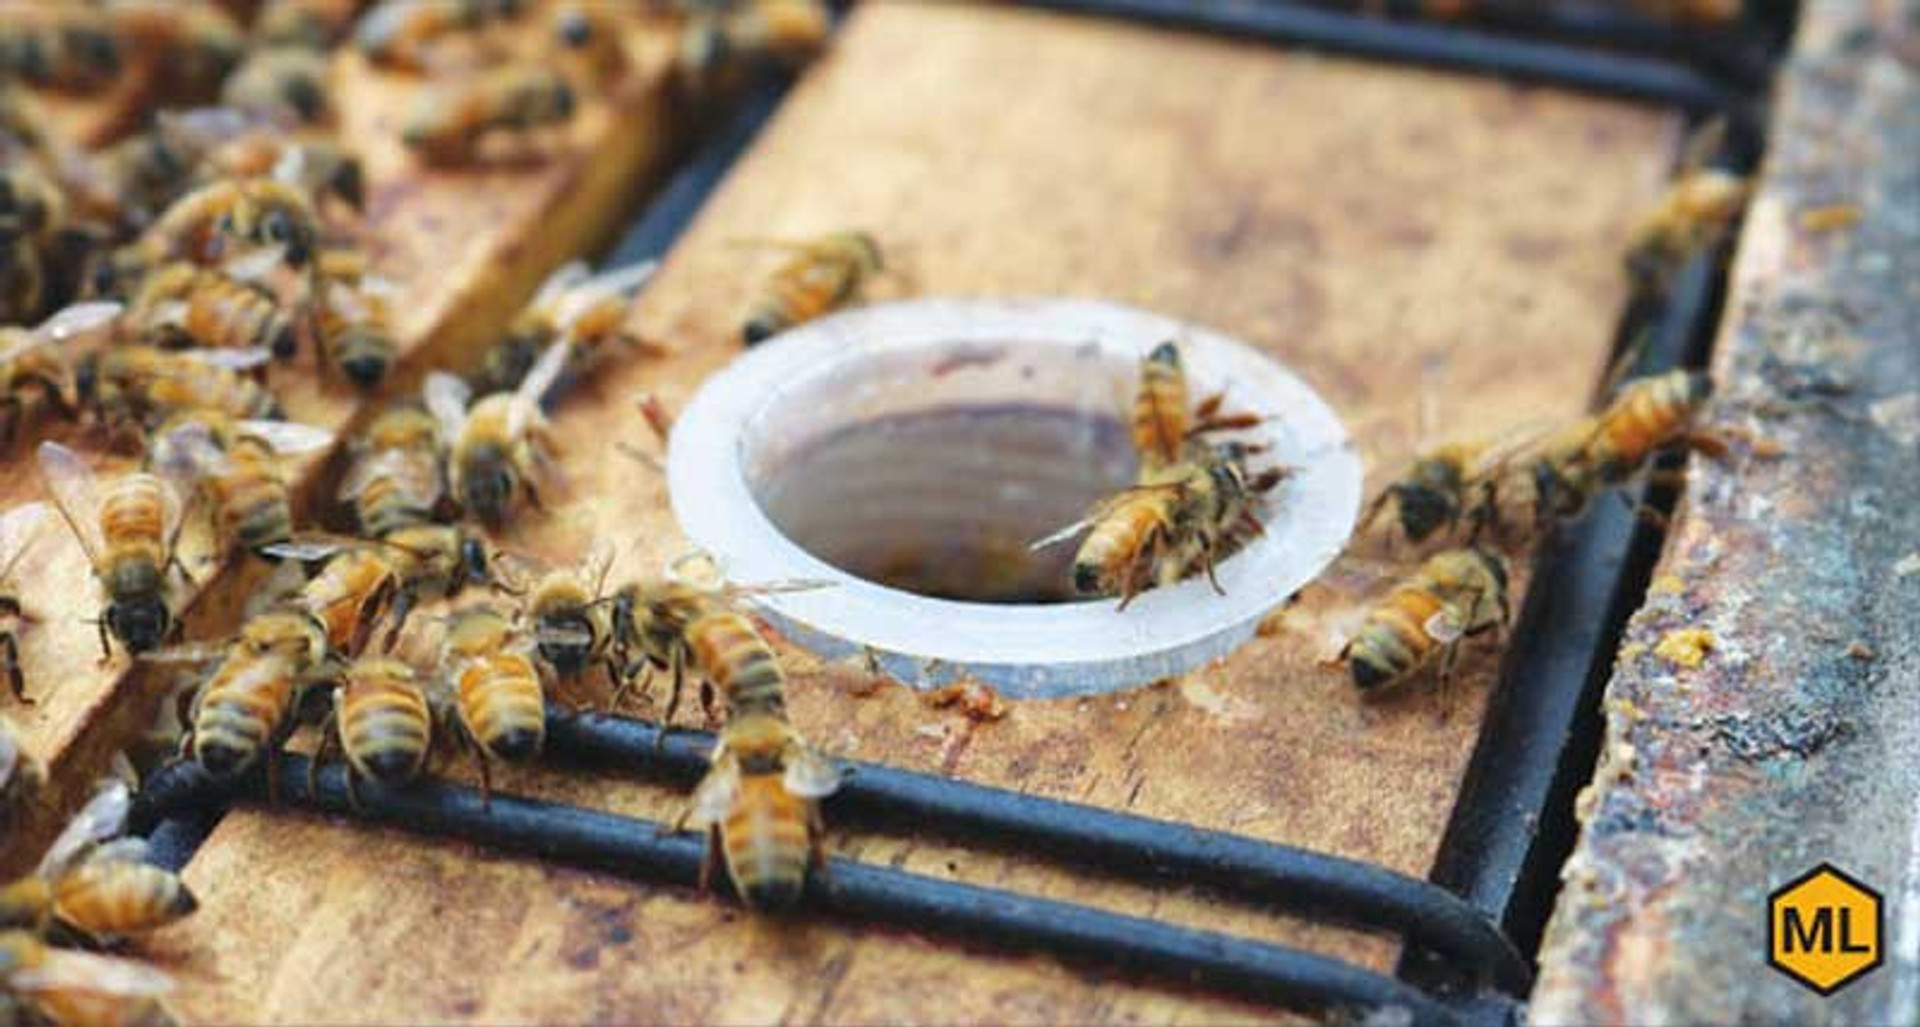 The Advantages of Small Cell Bees Keeping Backyard Bees